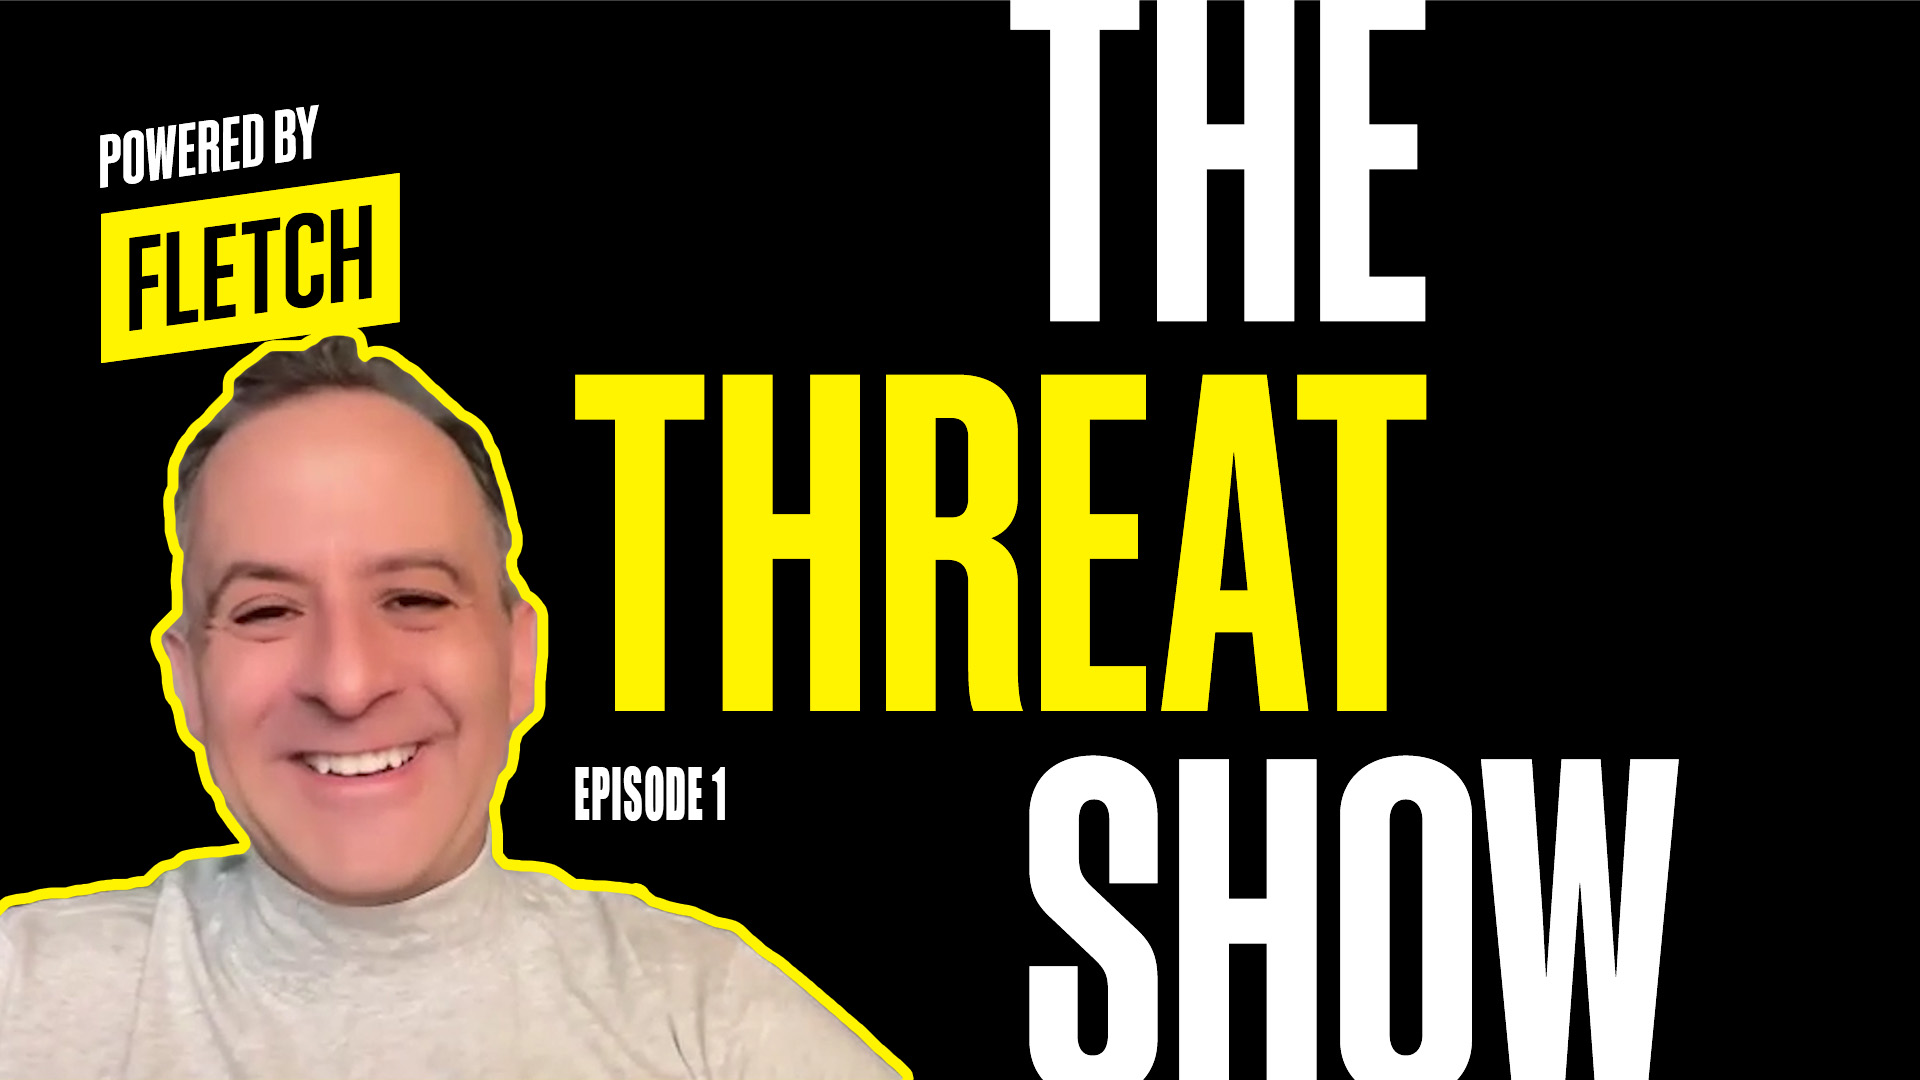 The Threat Show Ep. 1